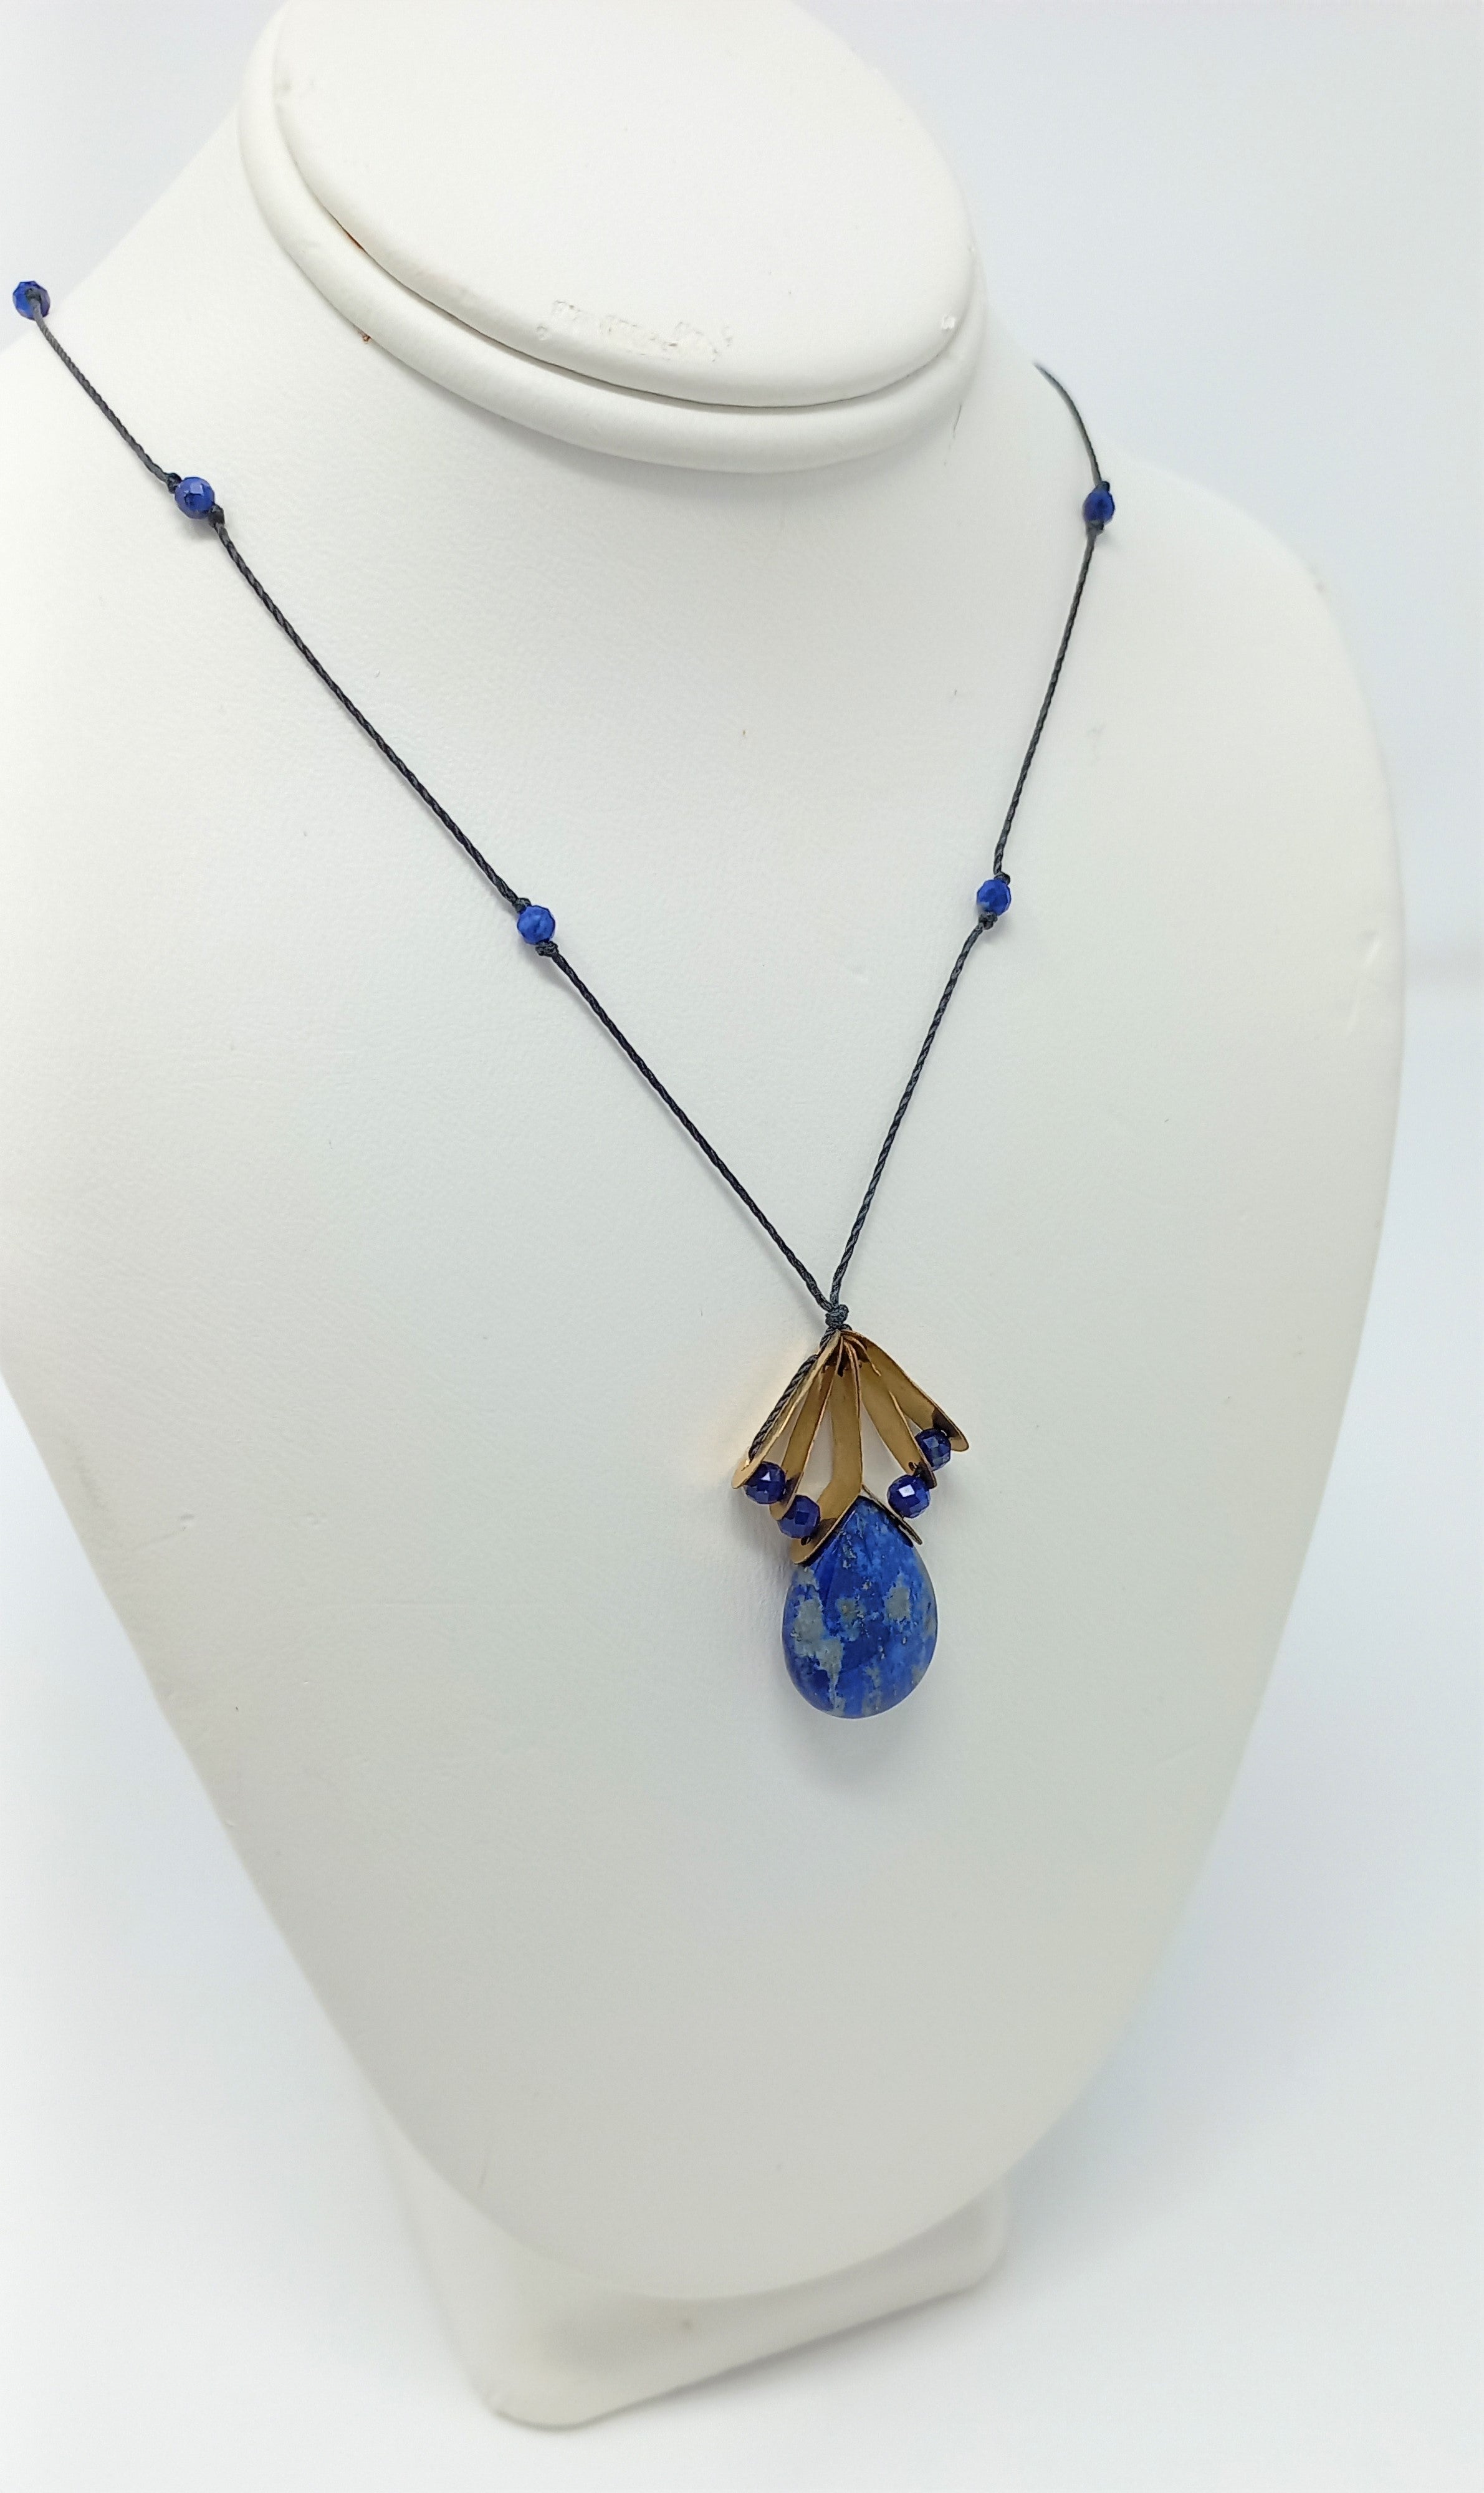 N285 Gold and Lapis Fan Necklace by Silvana Segulja